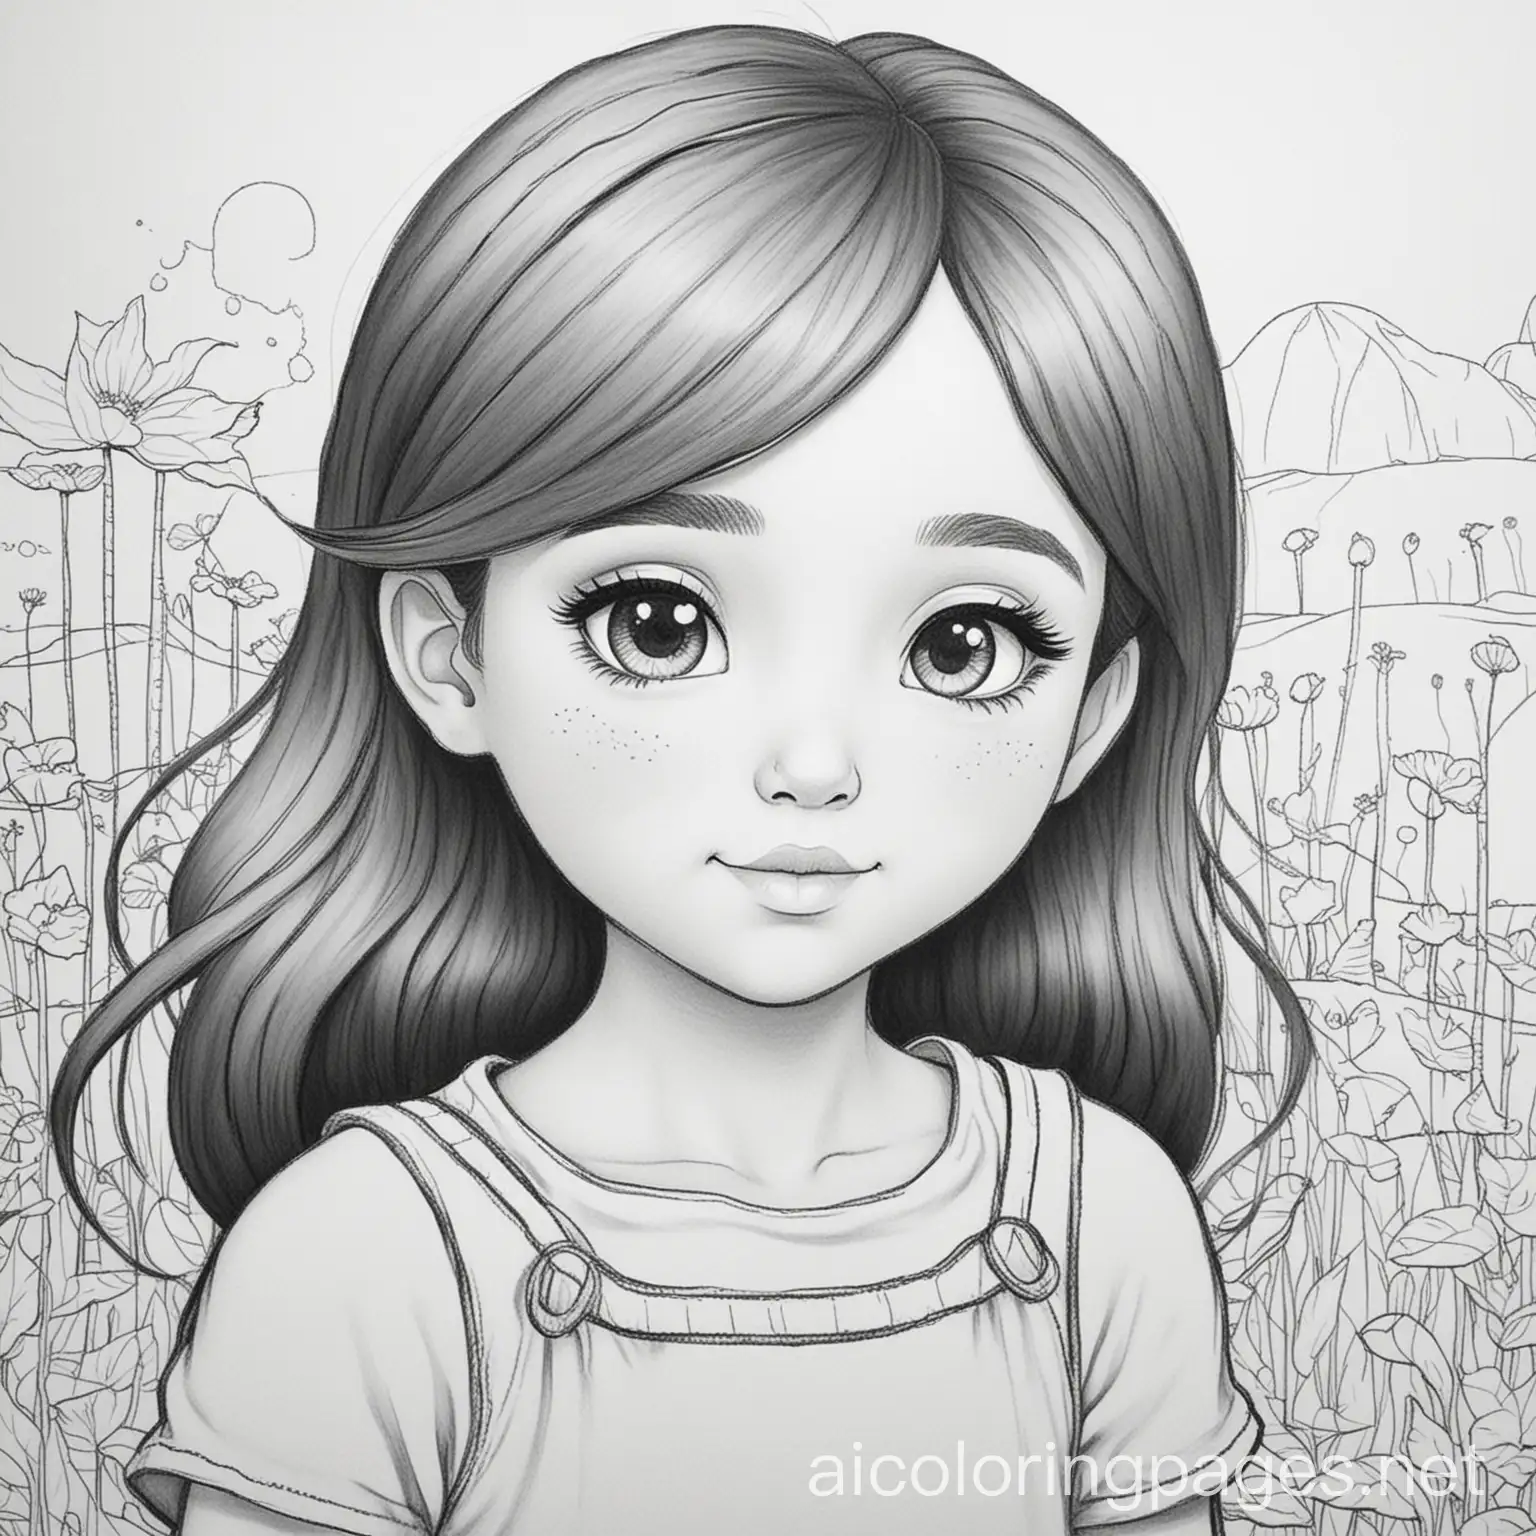 Magical-World-Coloring-Page-for-Kids-Human-Girl-in-Simple-Black-and-White-Line-Art